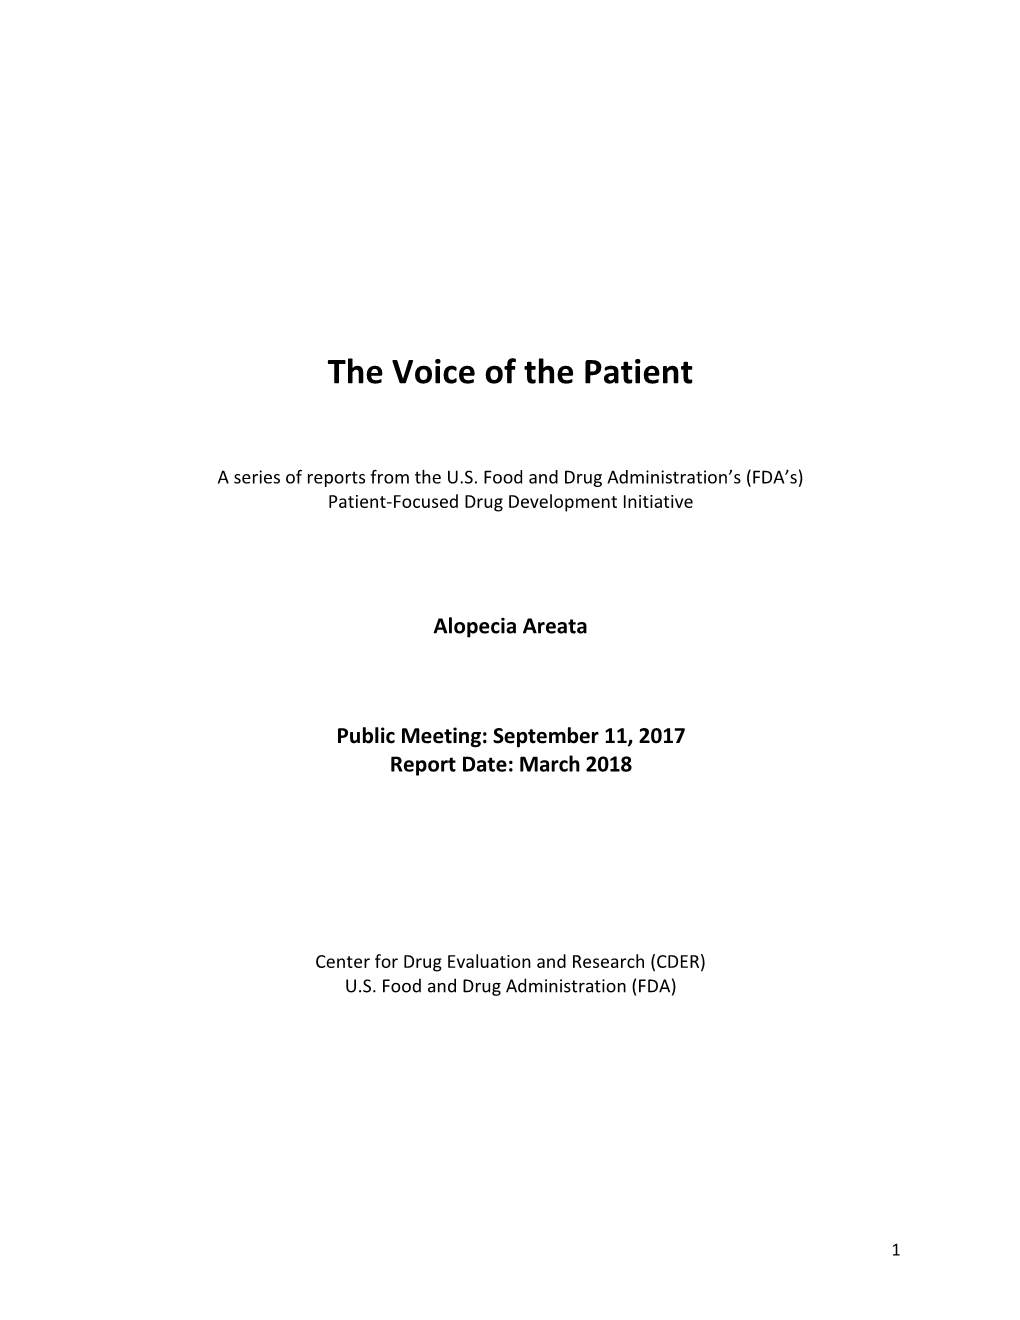 The Voice of the Patient: Alopecia Areata